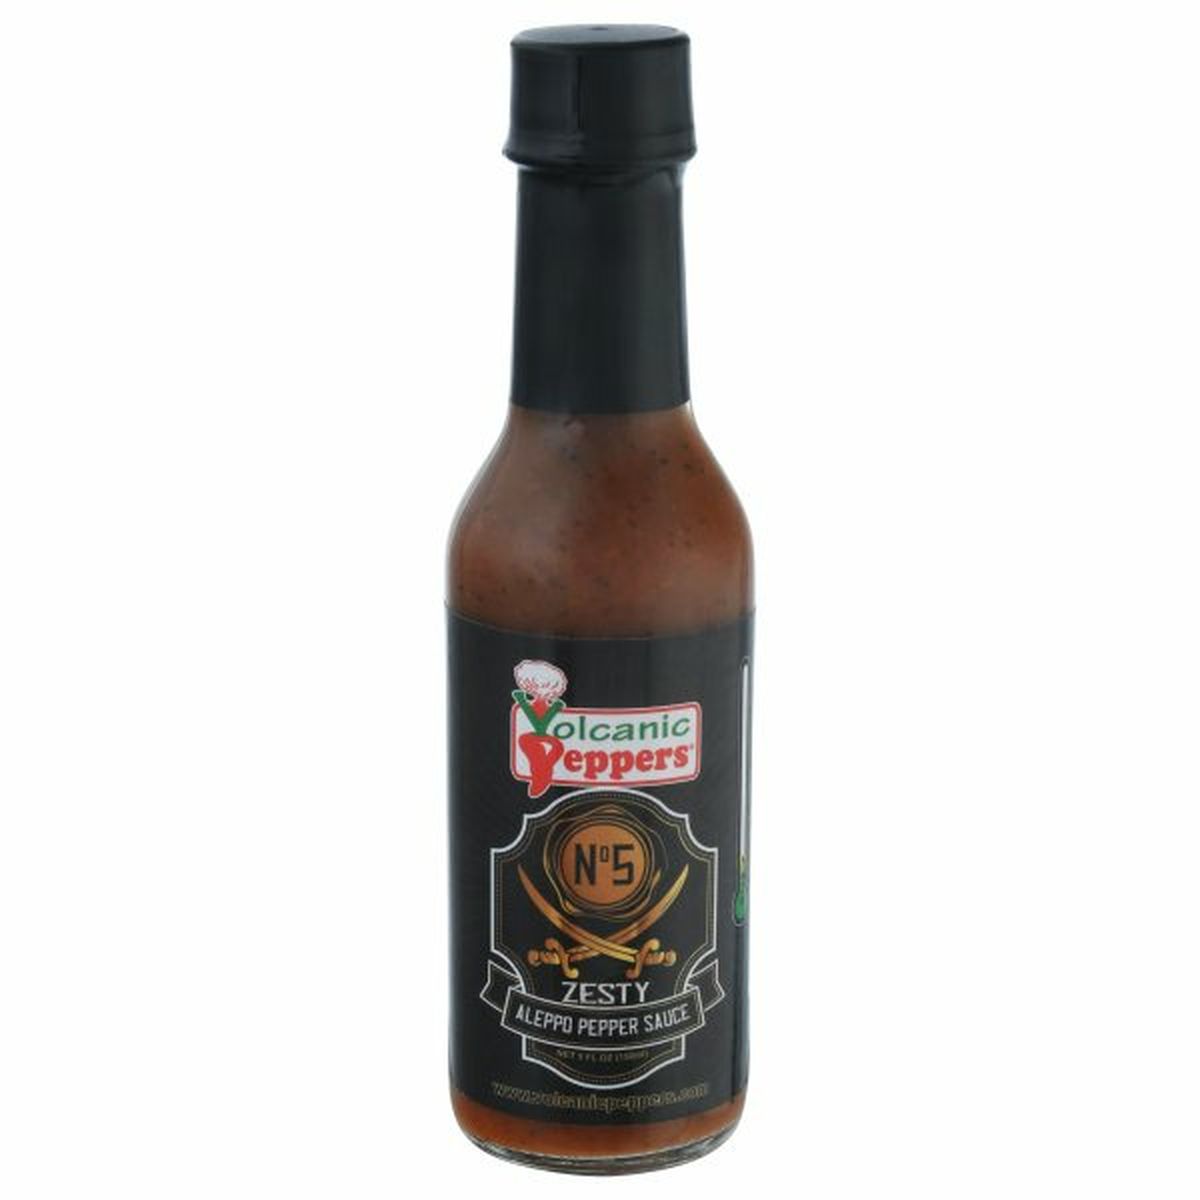 Calories in Volcanic Peppers Sauce, Aleppo Pepper, Zesty